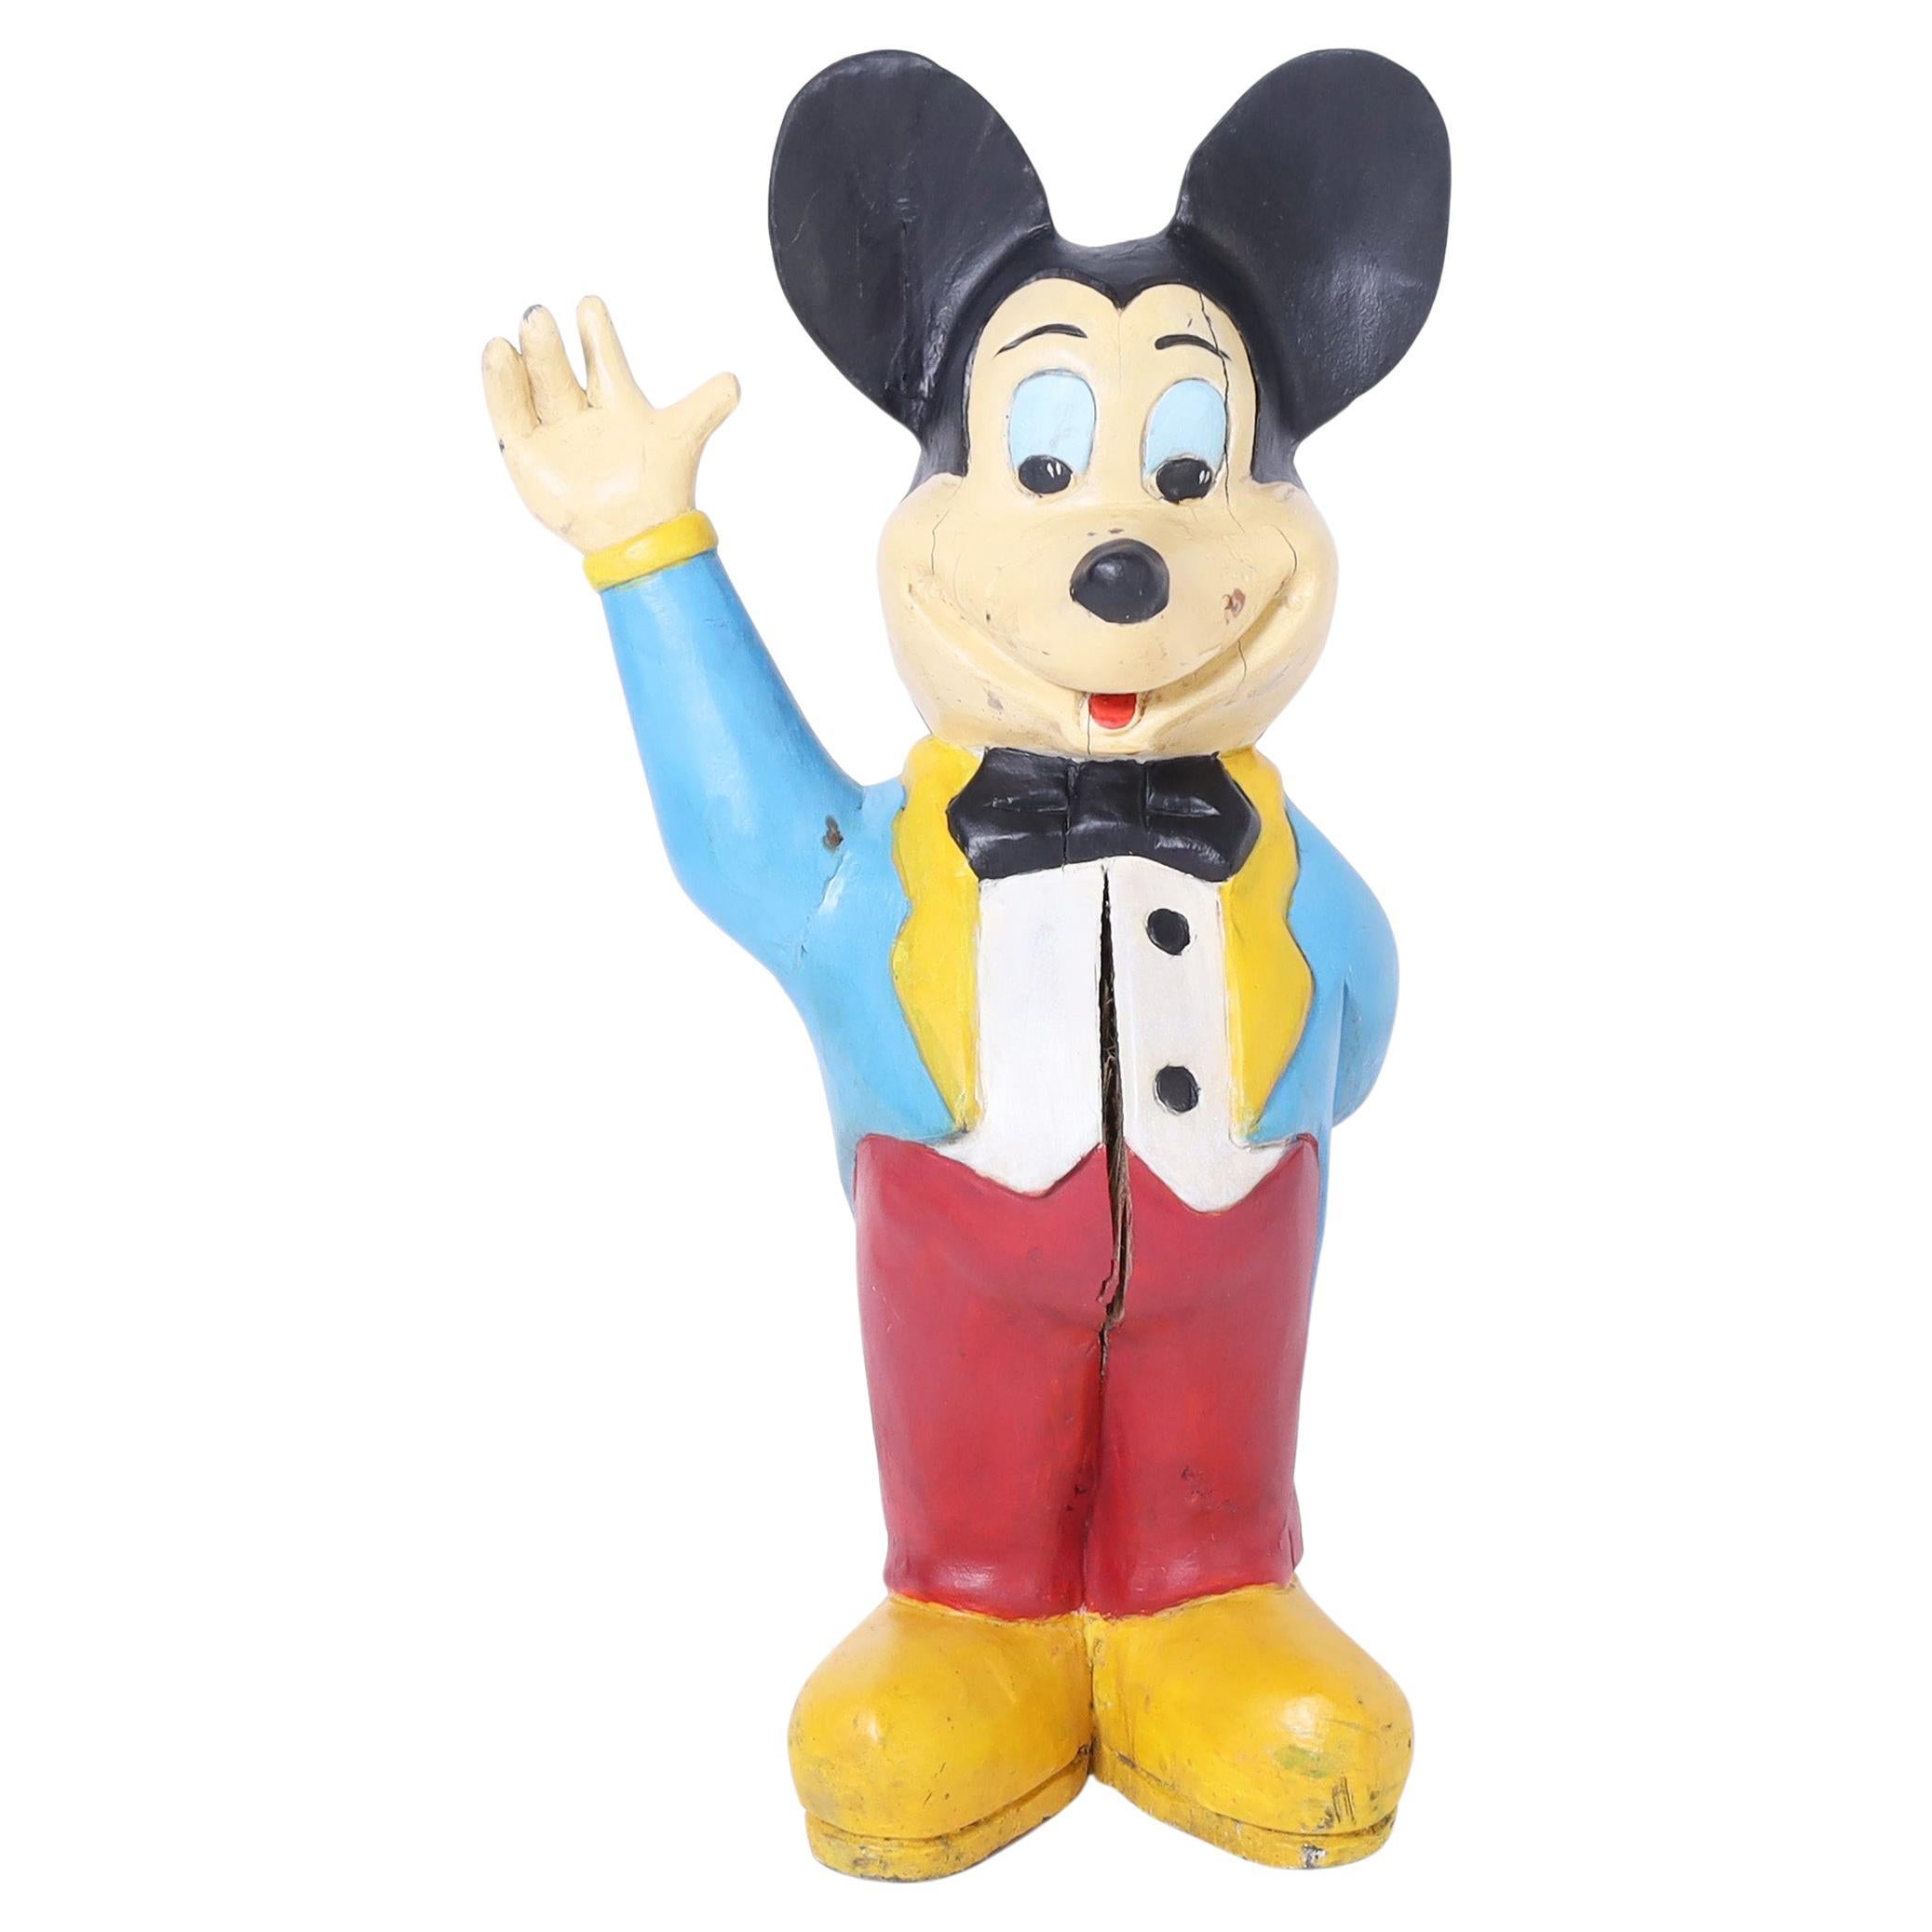 Mickey Mouse Vintage Wood Sculpture